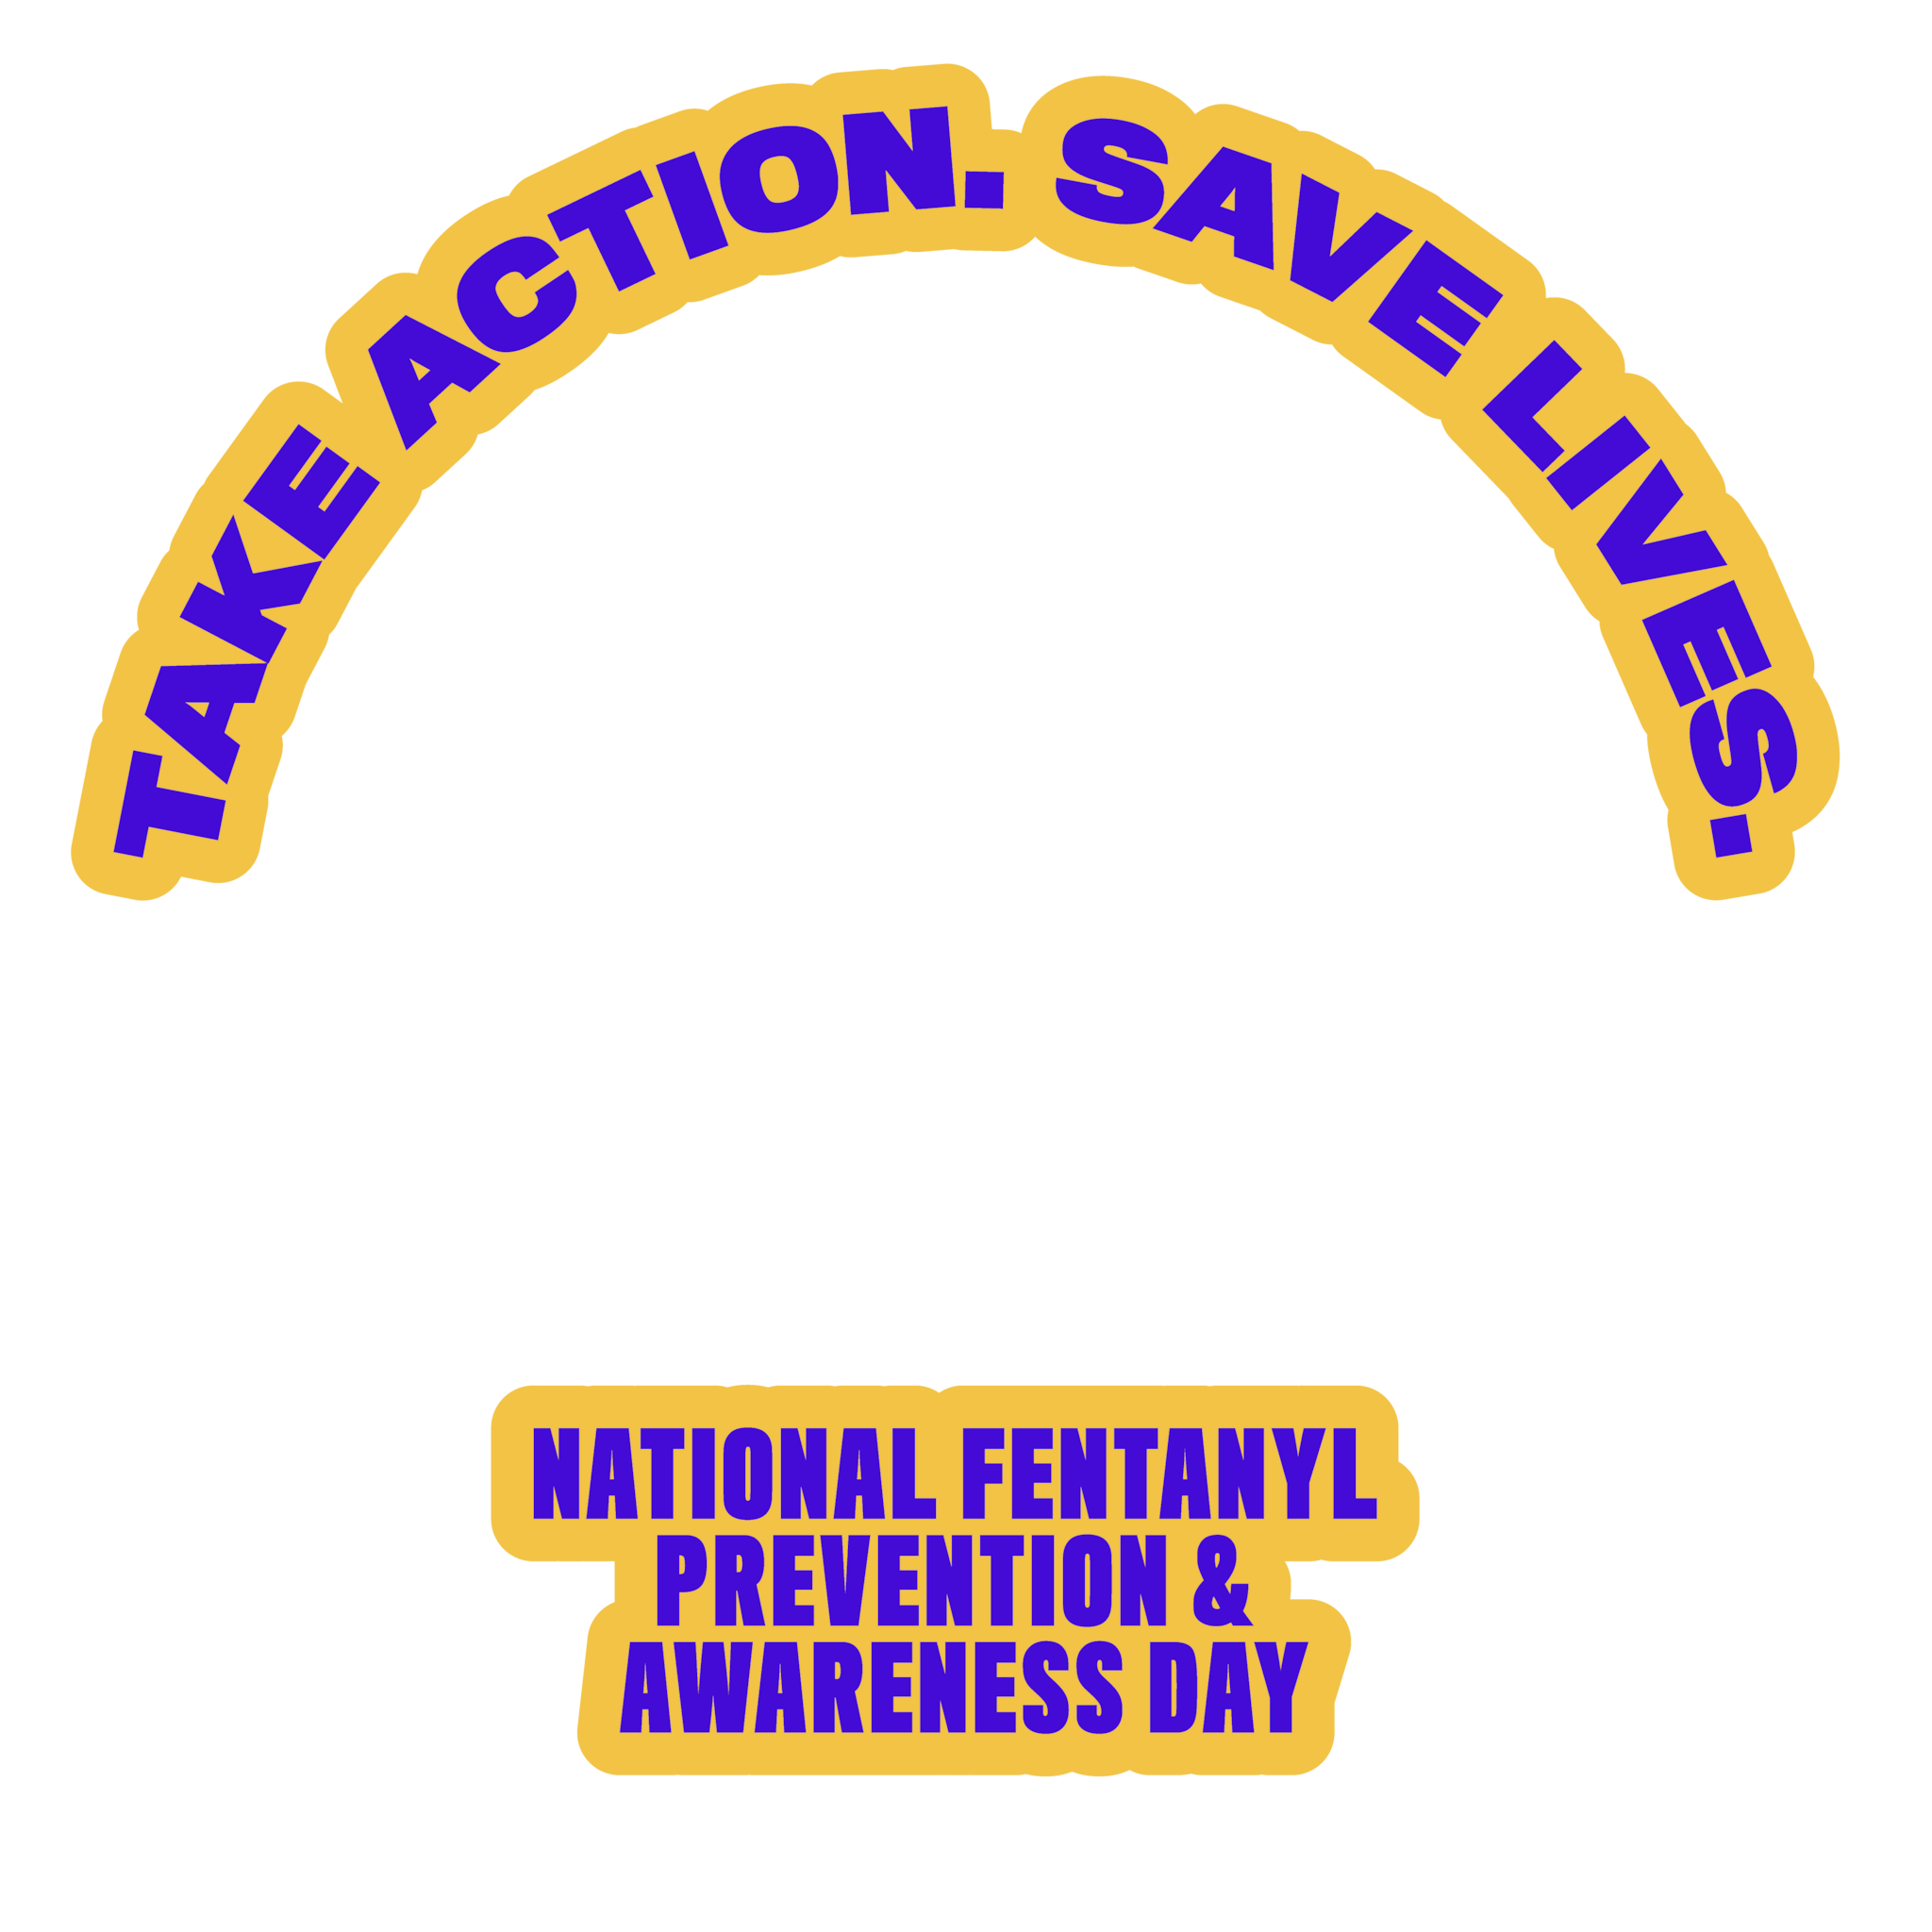 Take action. Save lives. National Fentanyl Prevention & Awareness Day